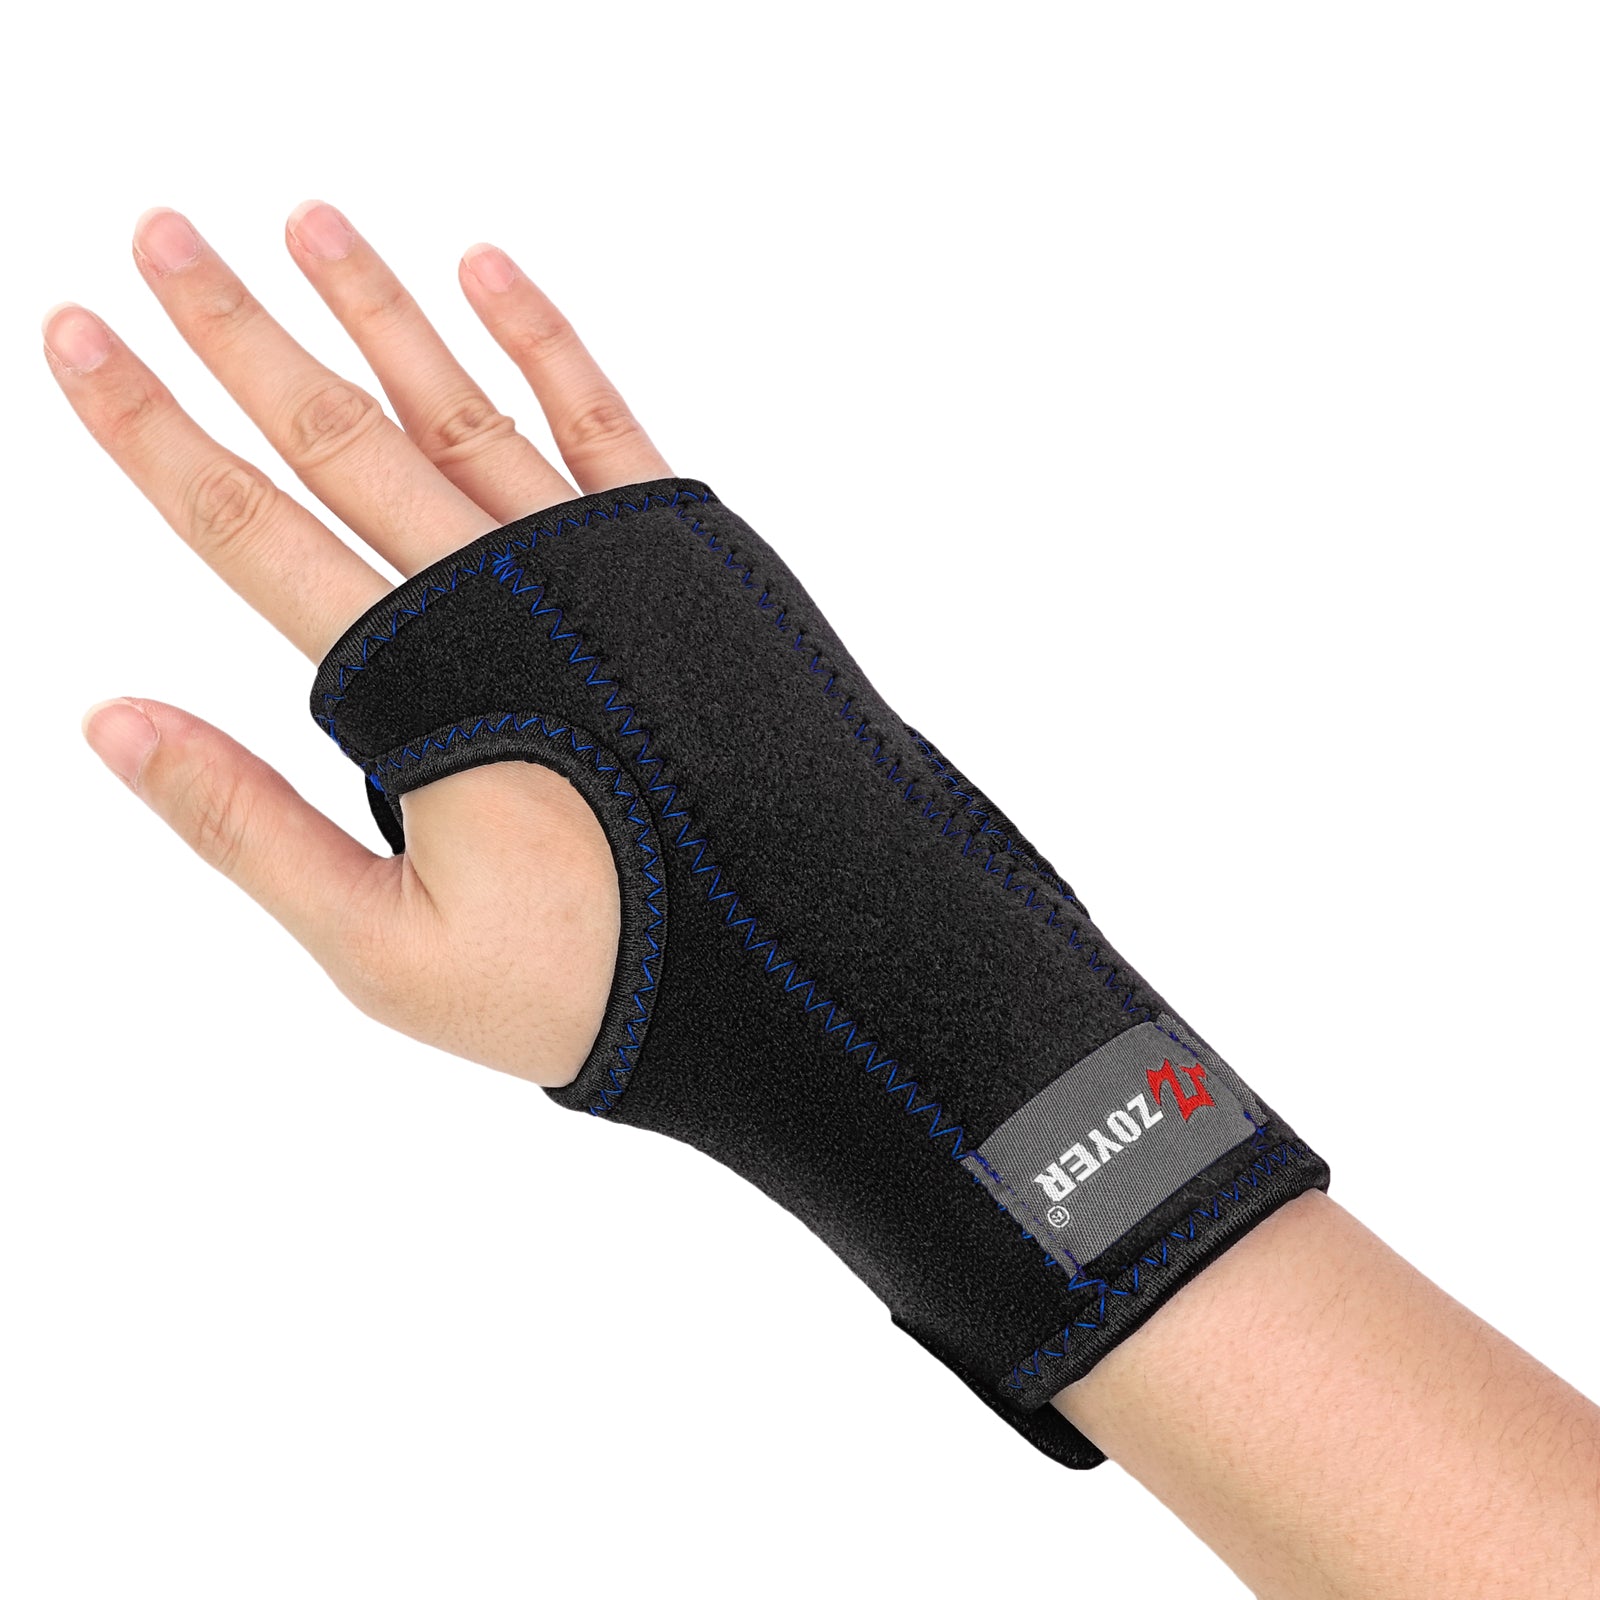 REVERSIBLE Wrist Brace for Carpal Tunnel Left & Right Hand Support